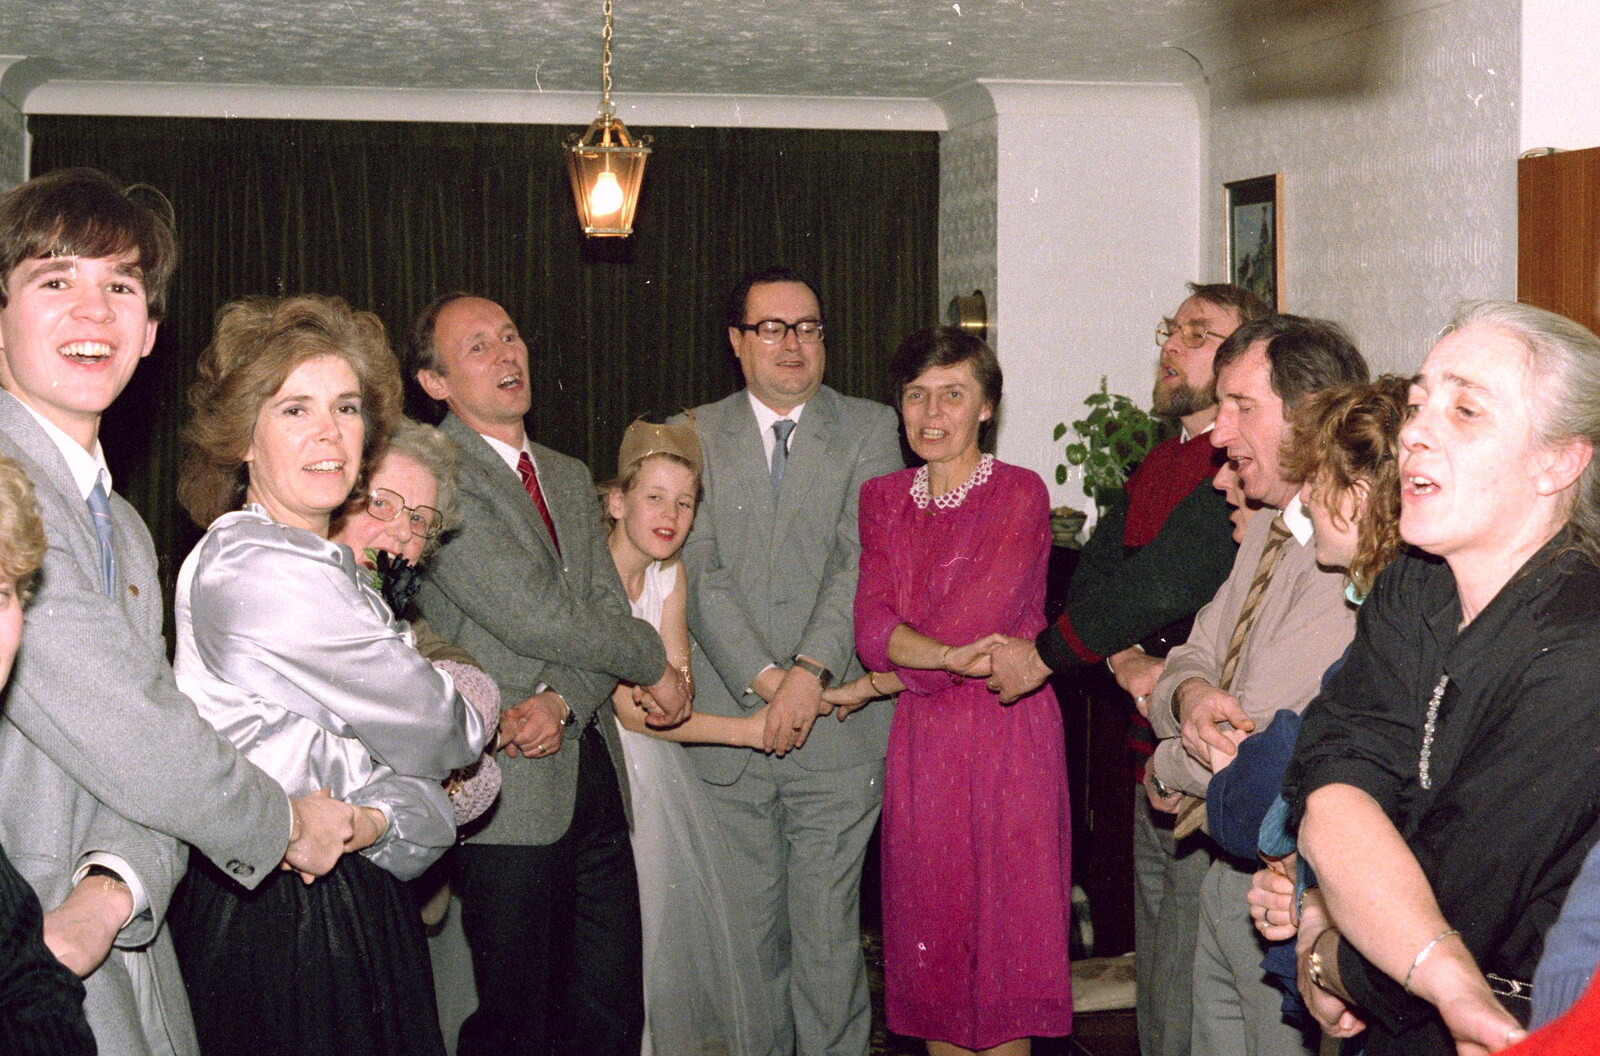 More Auld Lang Syne from New Year's Eve at Anna's, Walkford, Dorset - 31st December 1985